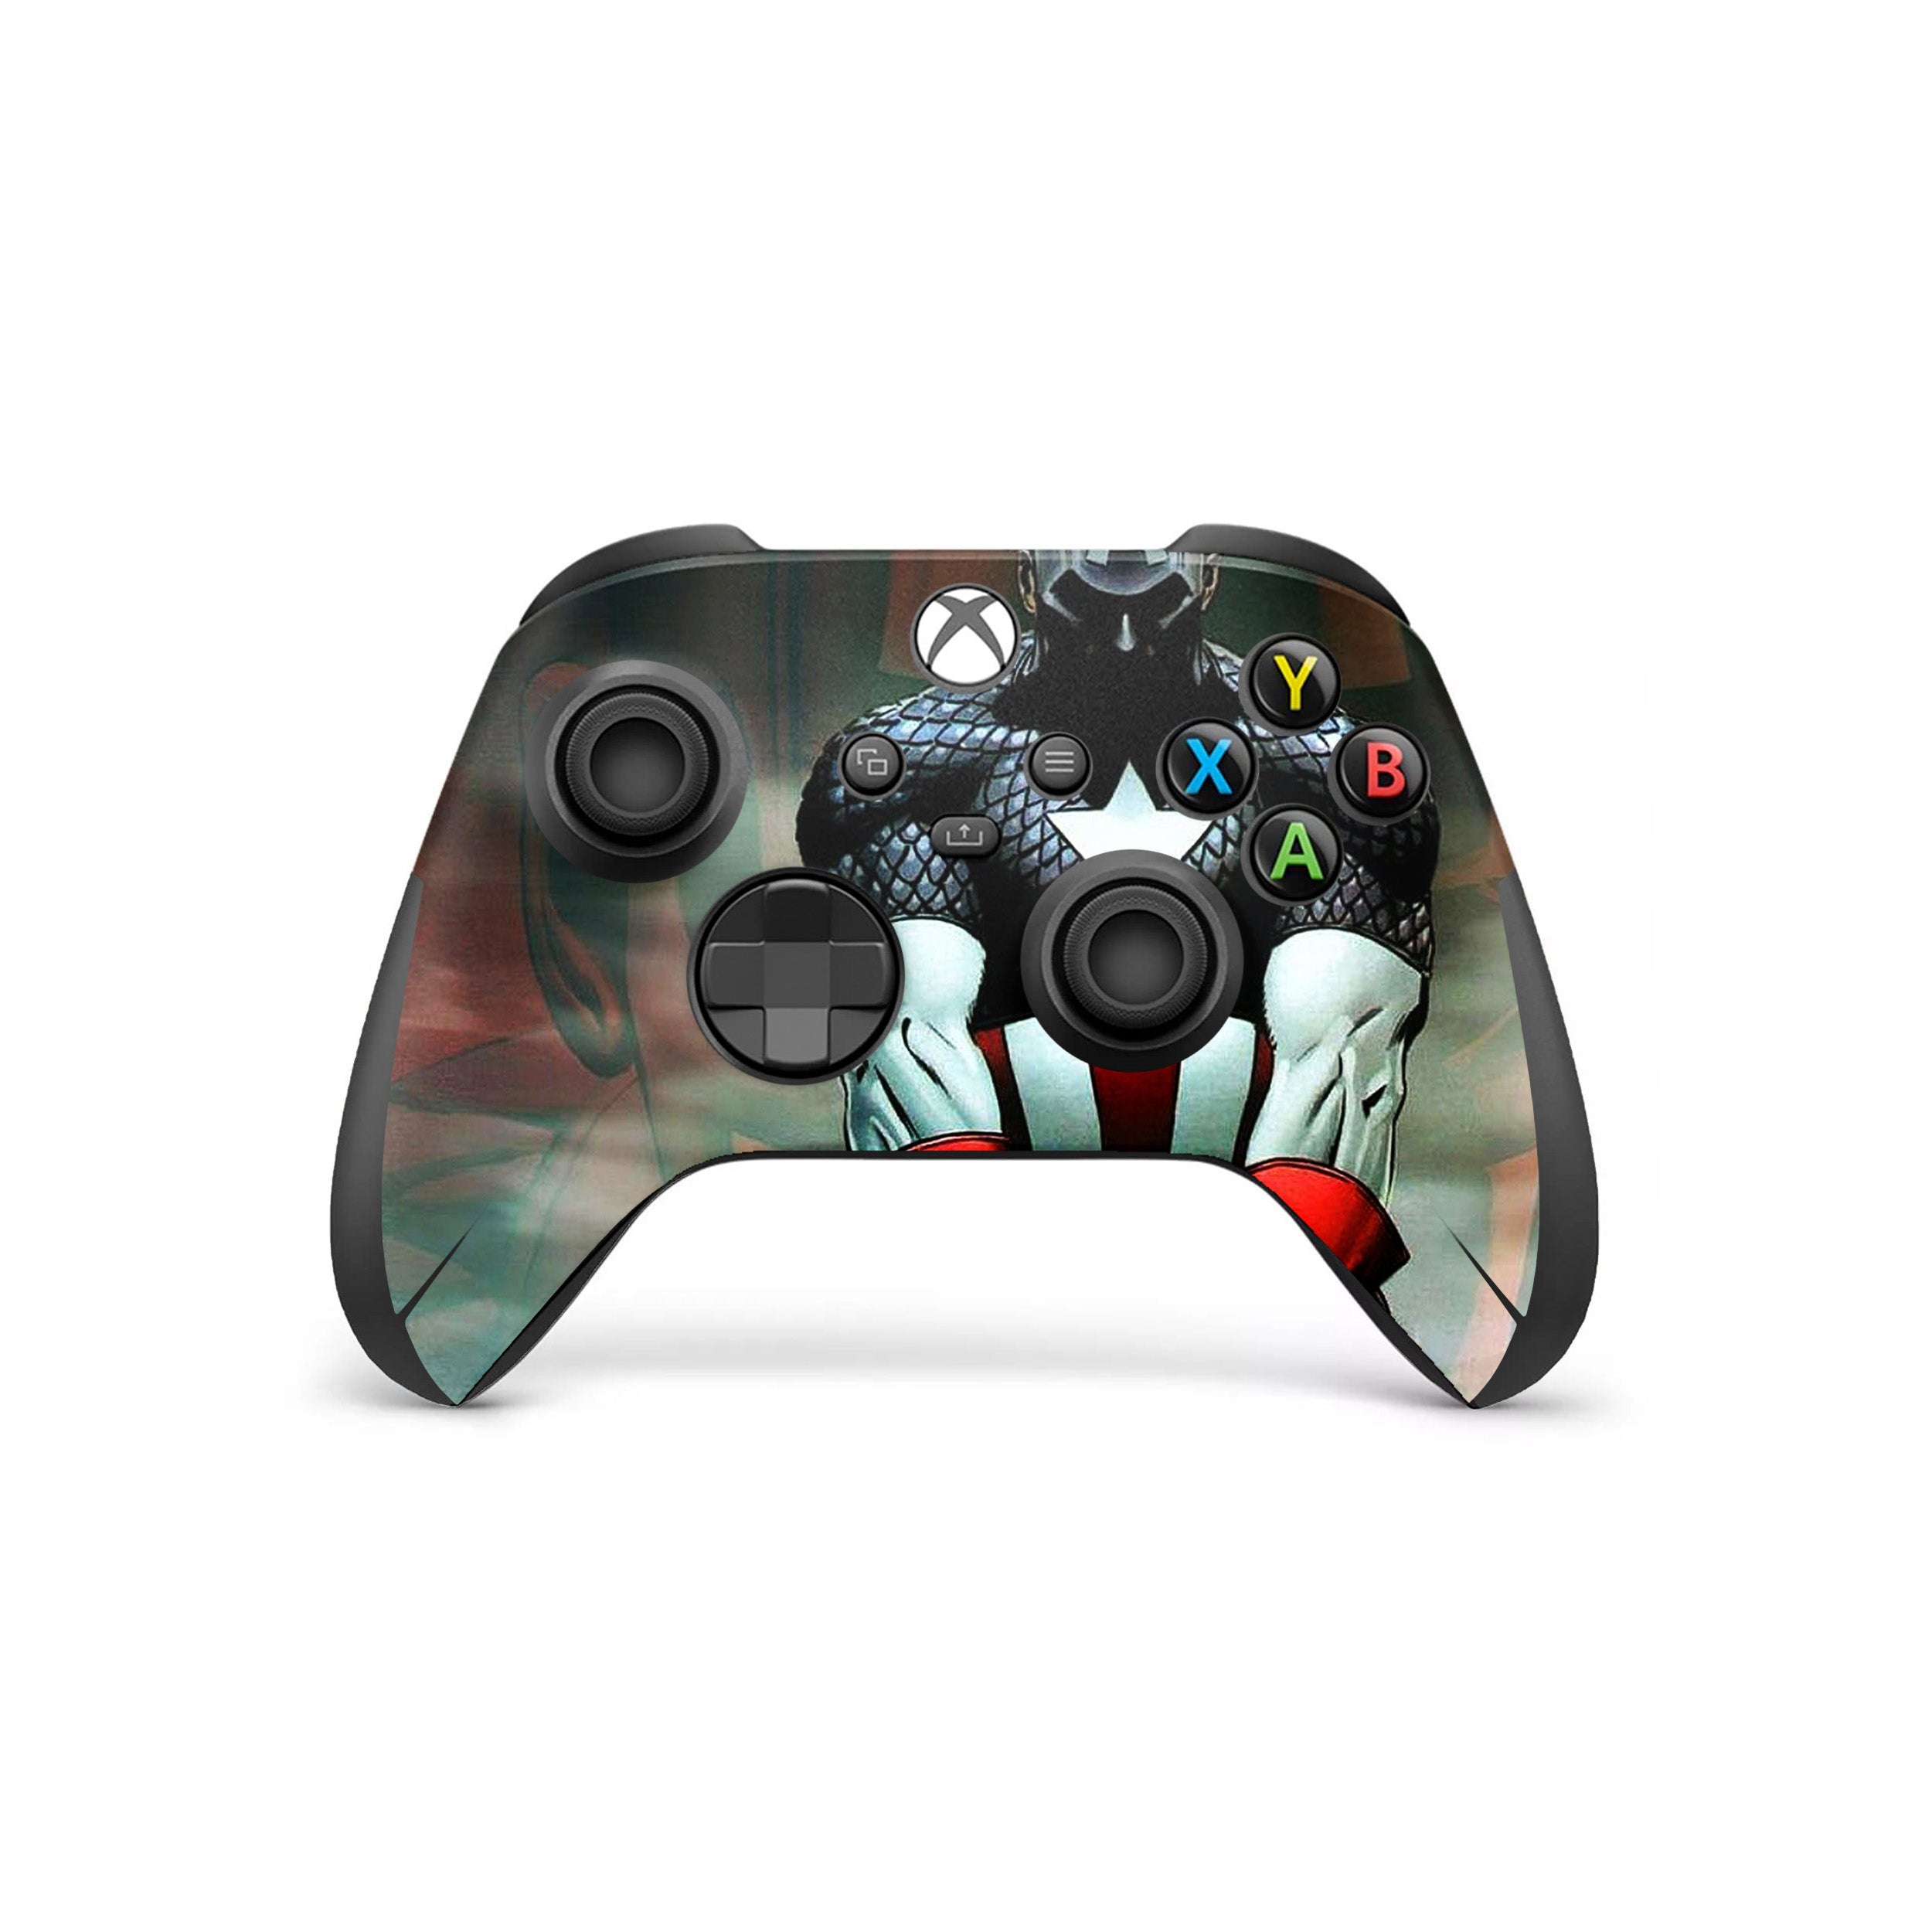 A video game skin featuring a Marvel Comics Captain America design for the Xbox Wireless Controller.